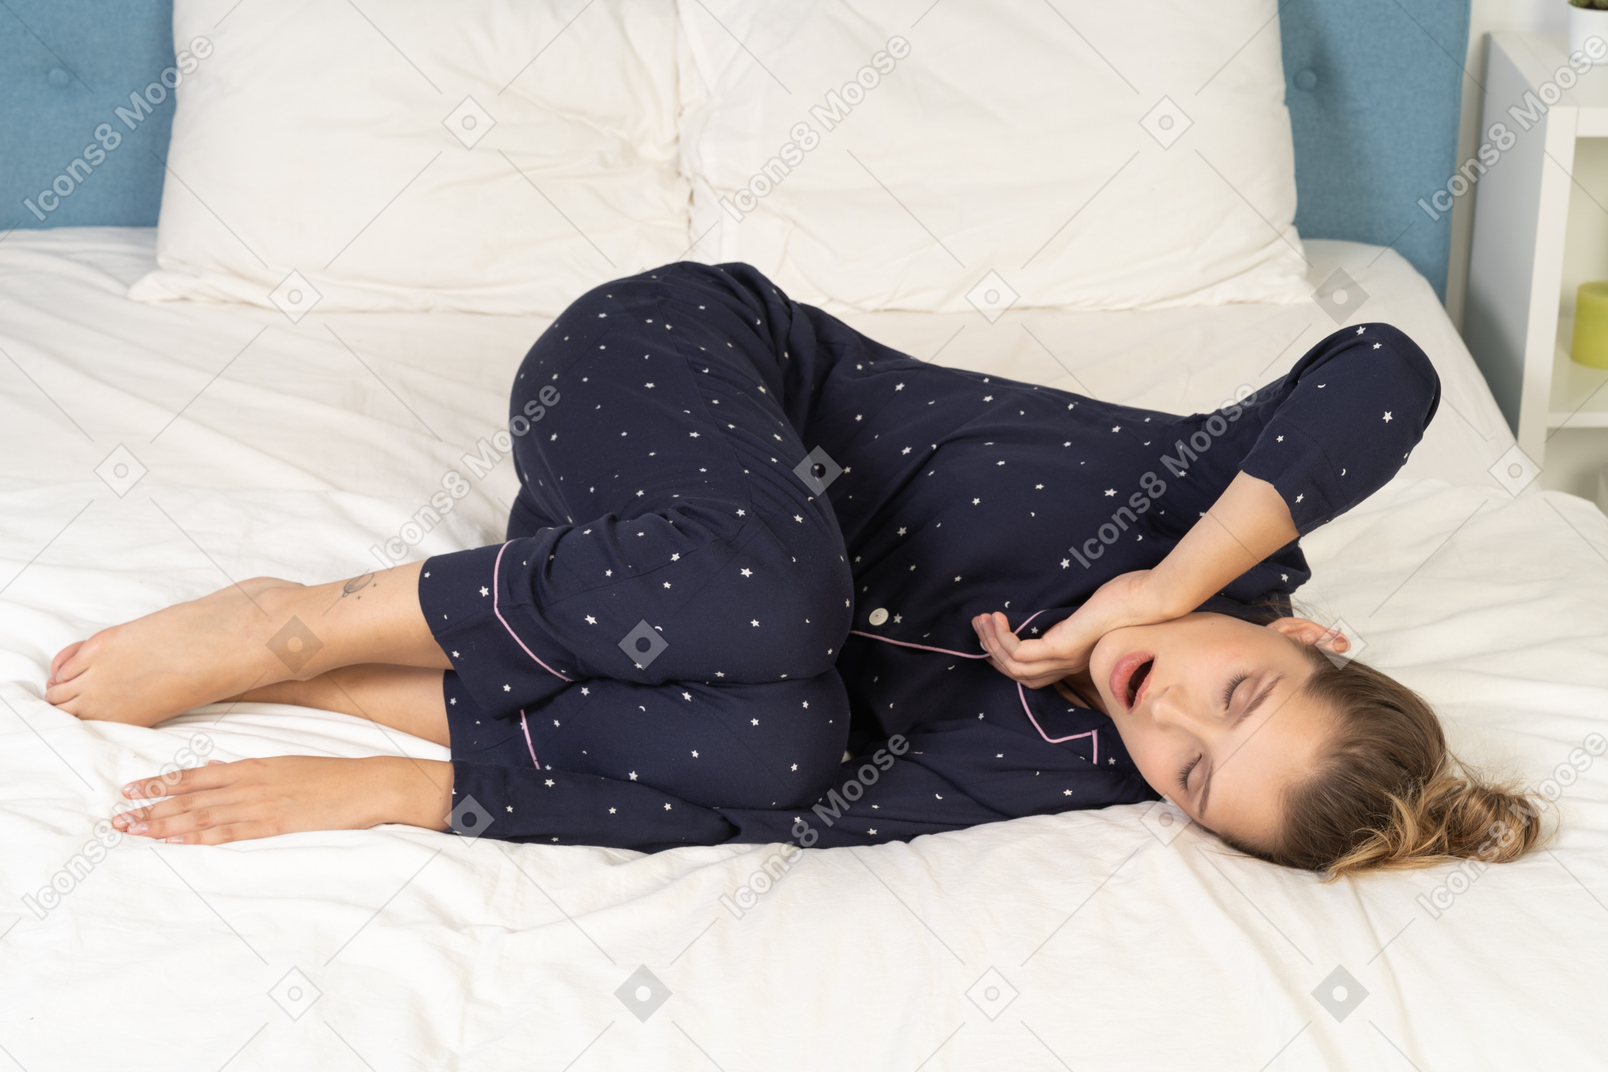 Full-length of a yawning young lady in pajamas laying in bed